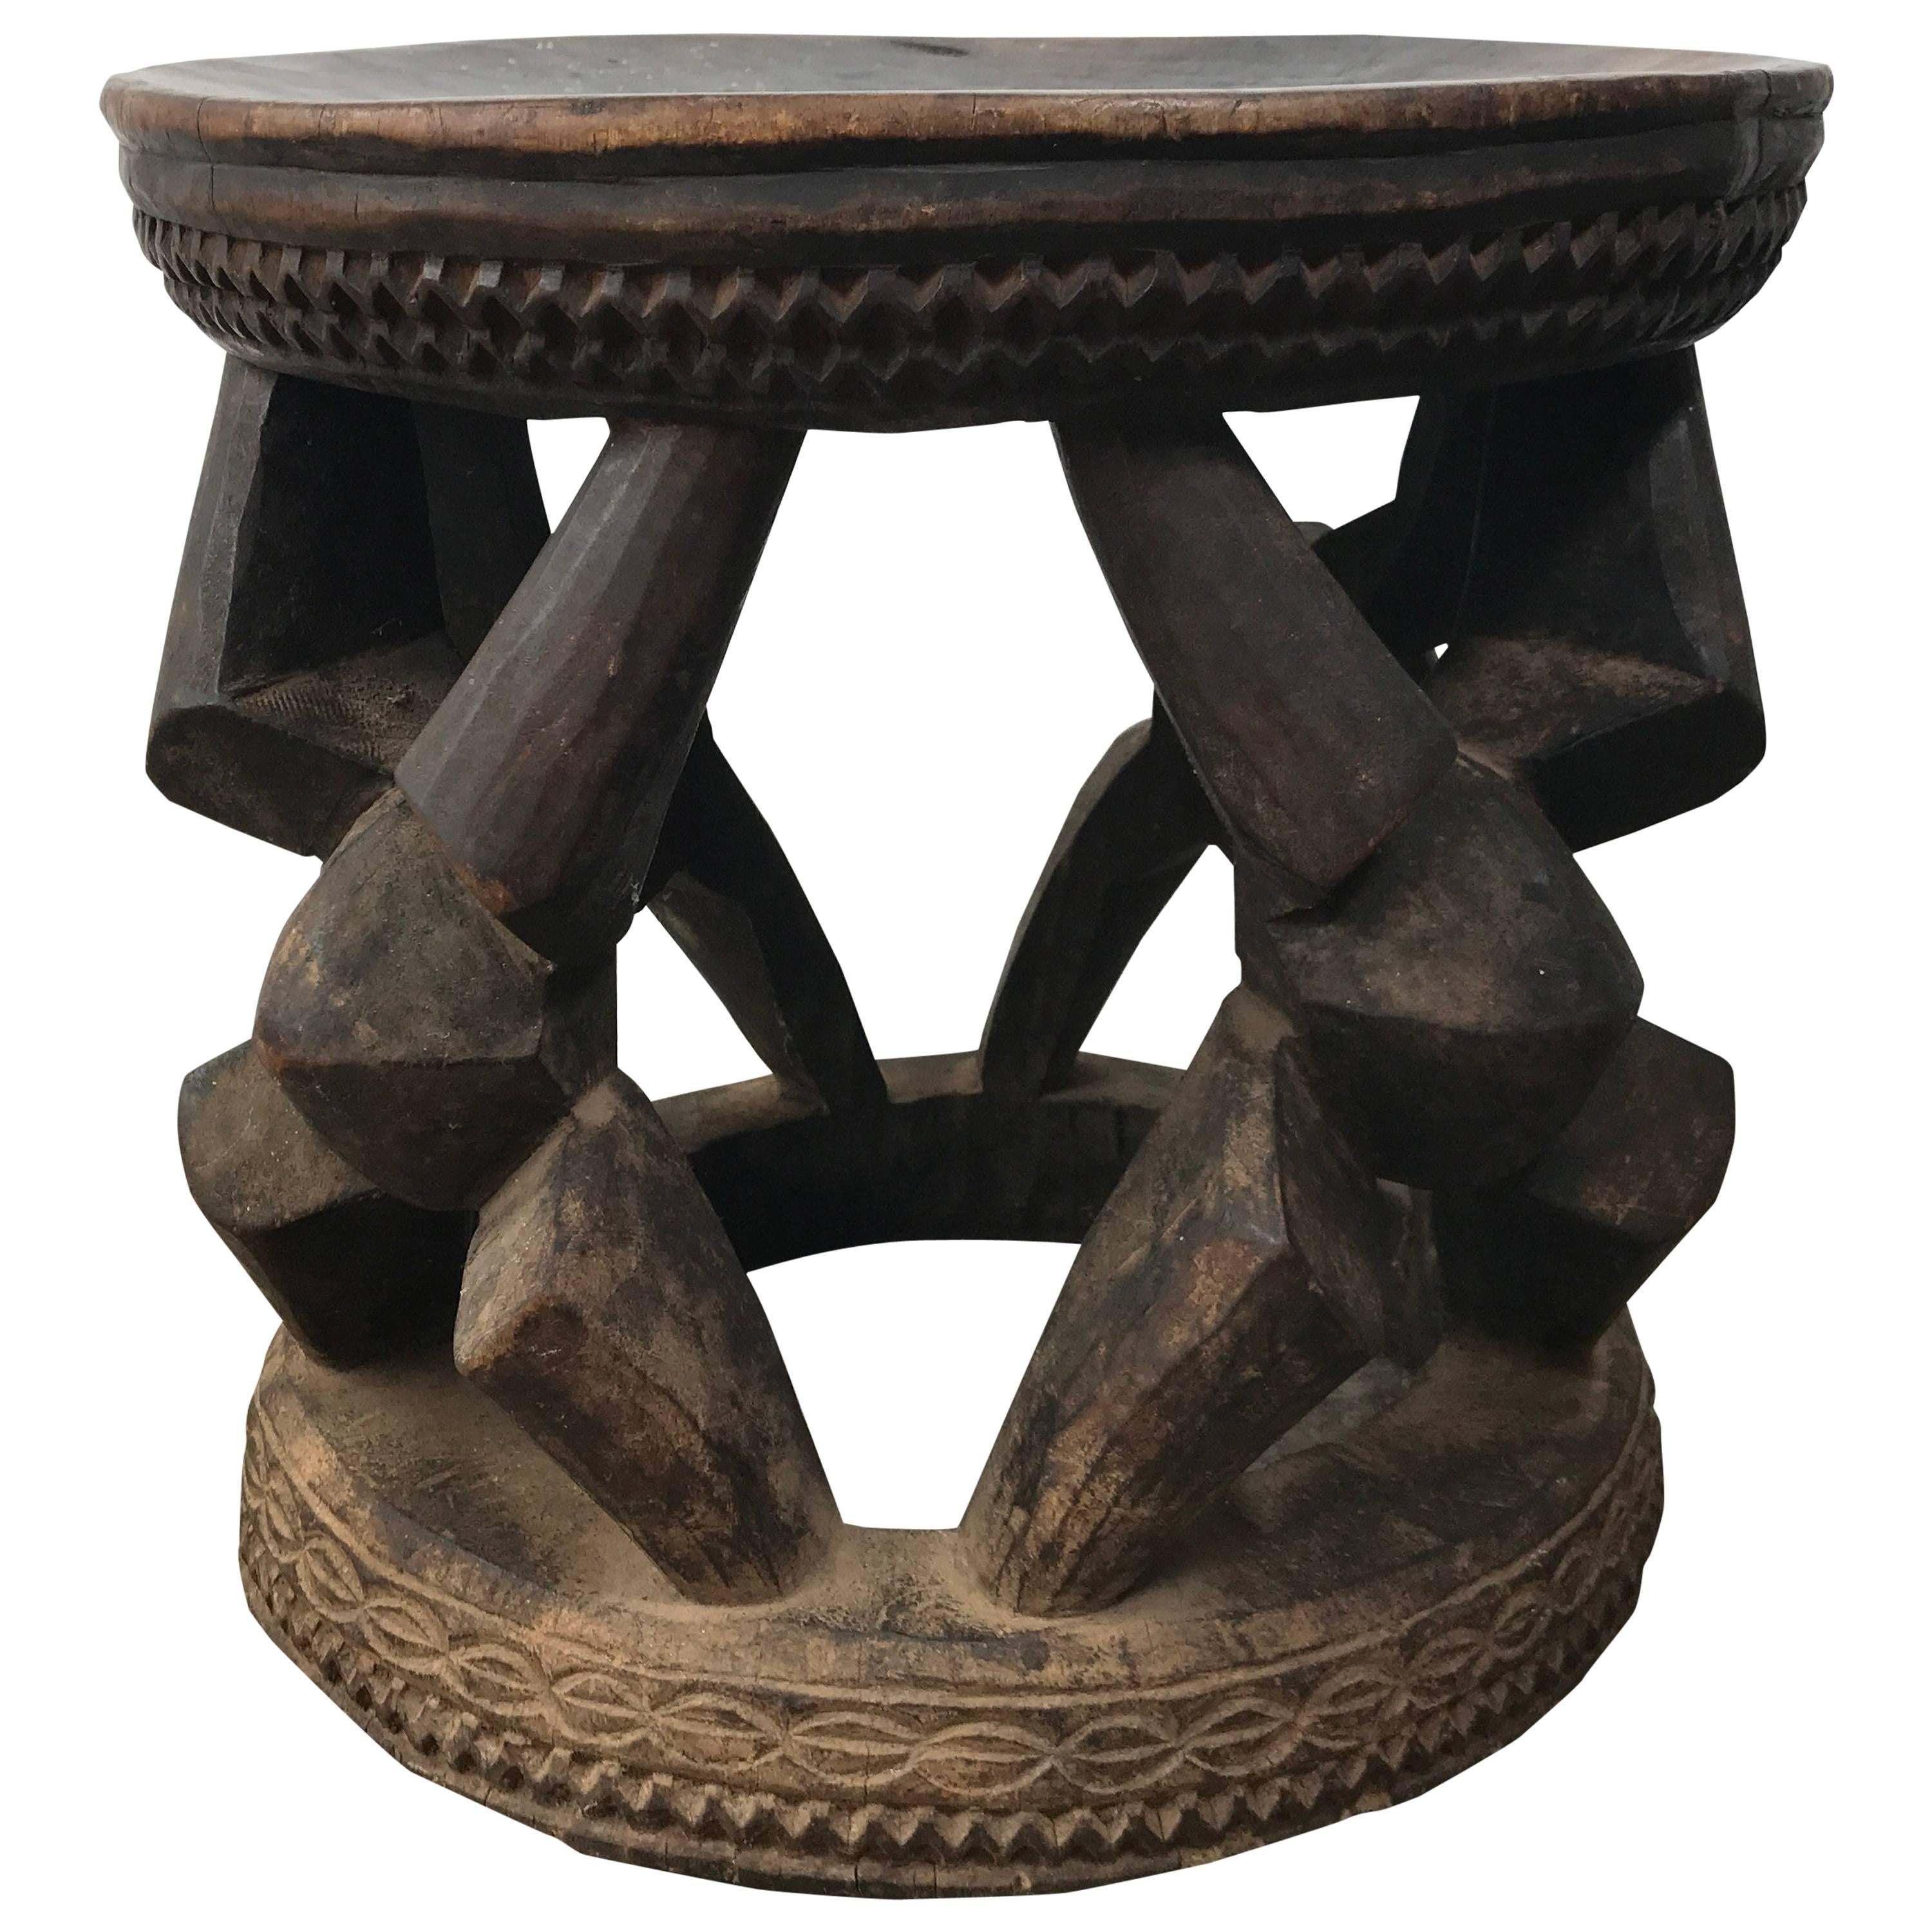 Unusual Hand-Carved African Stool, Early-Mid-20th Century